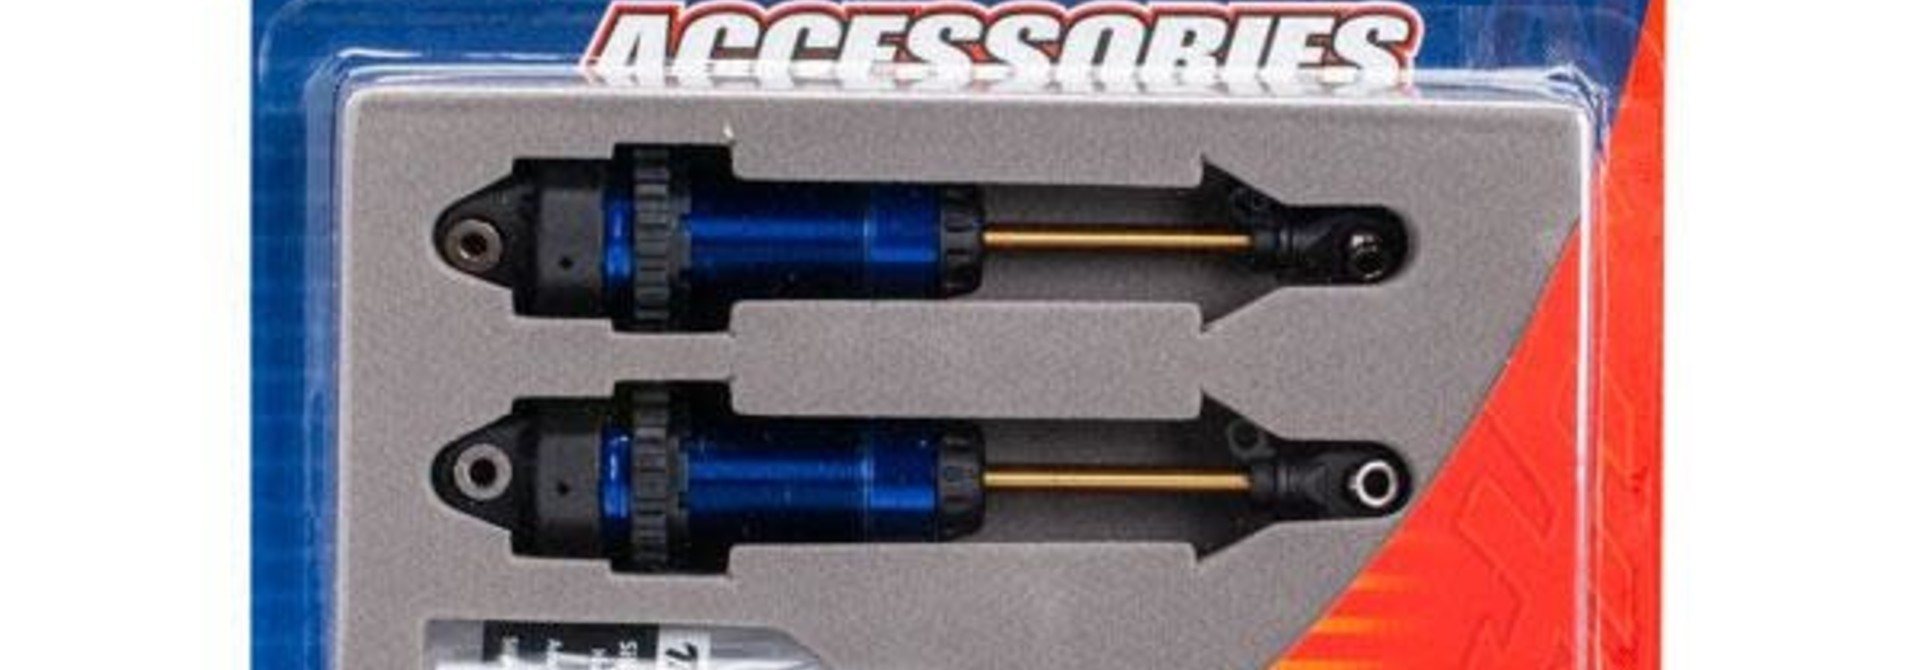 Shocks, GTR xx-long blue-anodized, PTFE-coated bodies with TiN shafts (fully ass